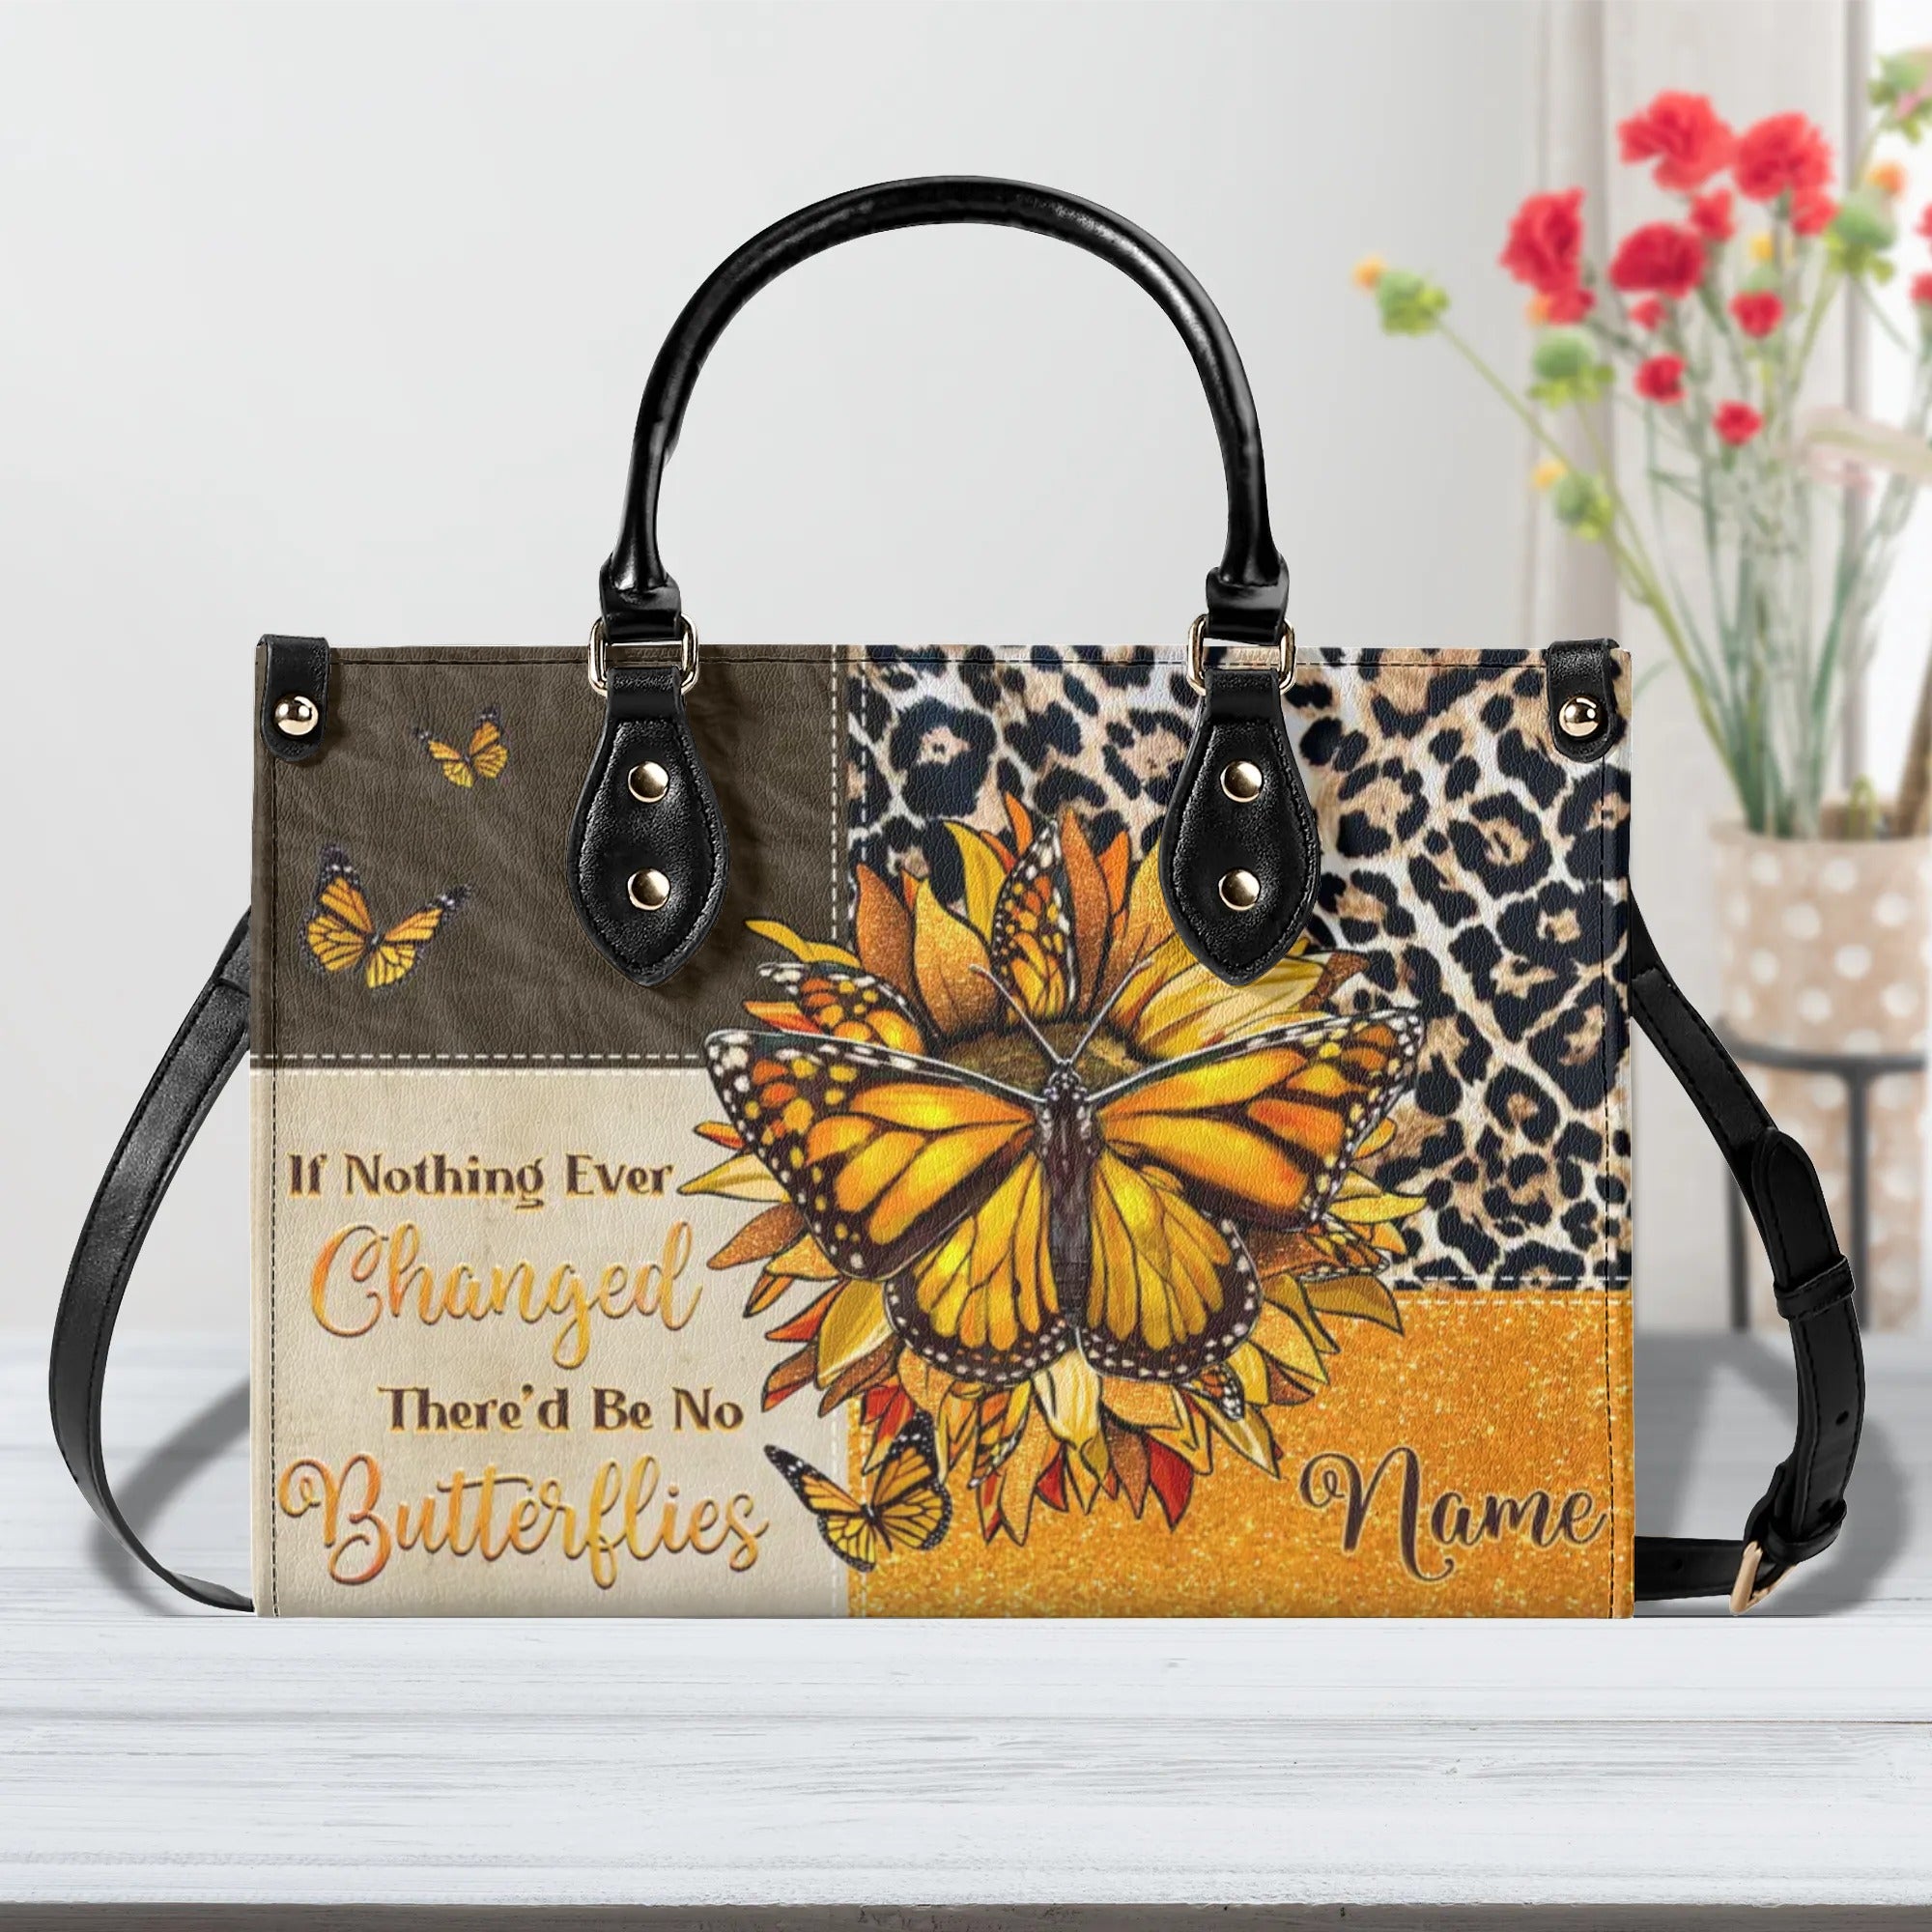 IF NOTHING EVER CHANGED BUTTERFLY LEATHER HANDBAG - TLNZ3105245